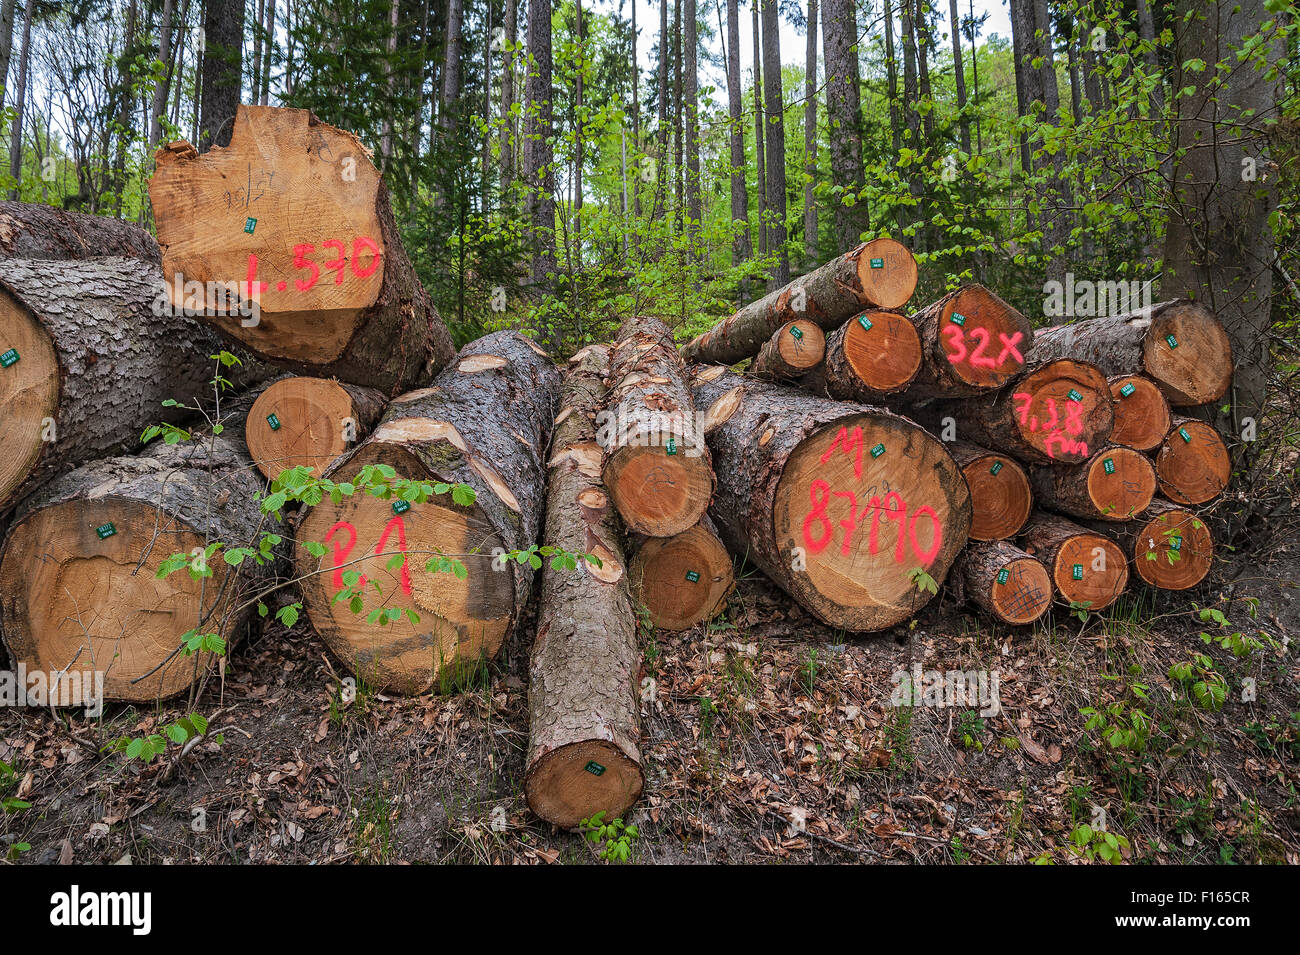 Pile of tree trunks, spray painted with markings, Bad Schwalbach, Hesse, Germany Stock Photo